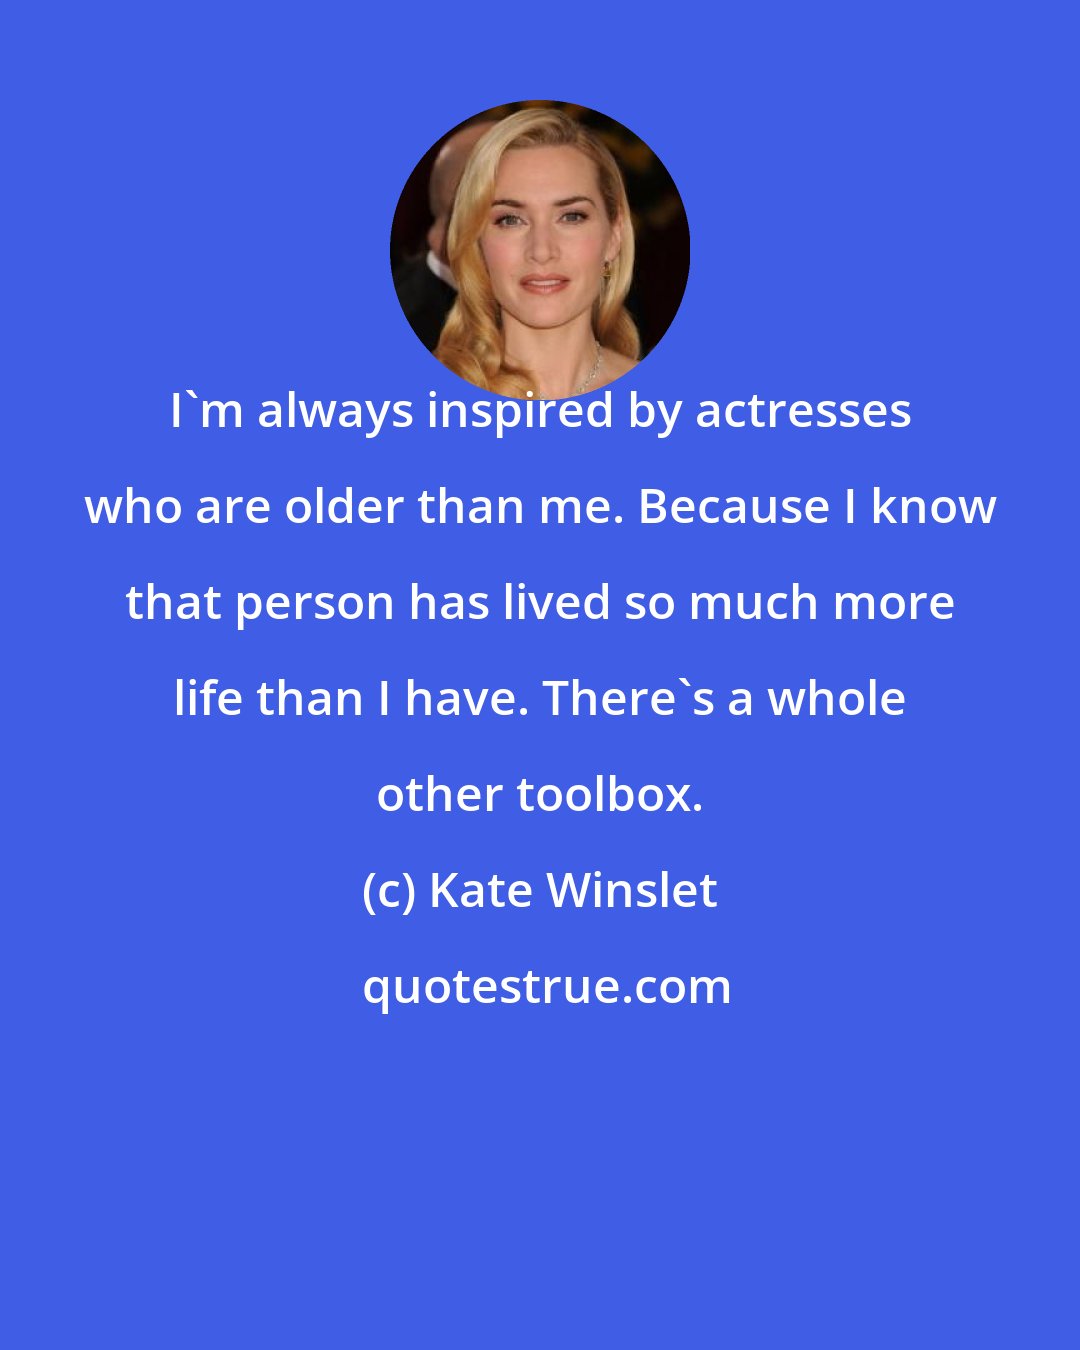 Kate Winslet: I'm always inspired by actresses who are older than me. Because I know that person has lived so much more life than I have. There's a whole other toolbox.